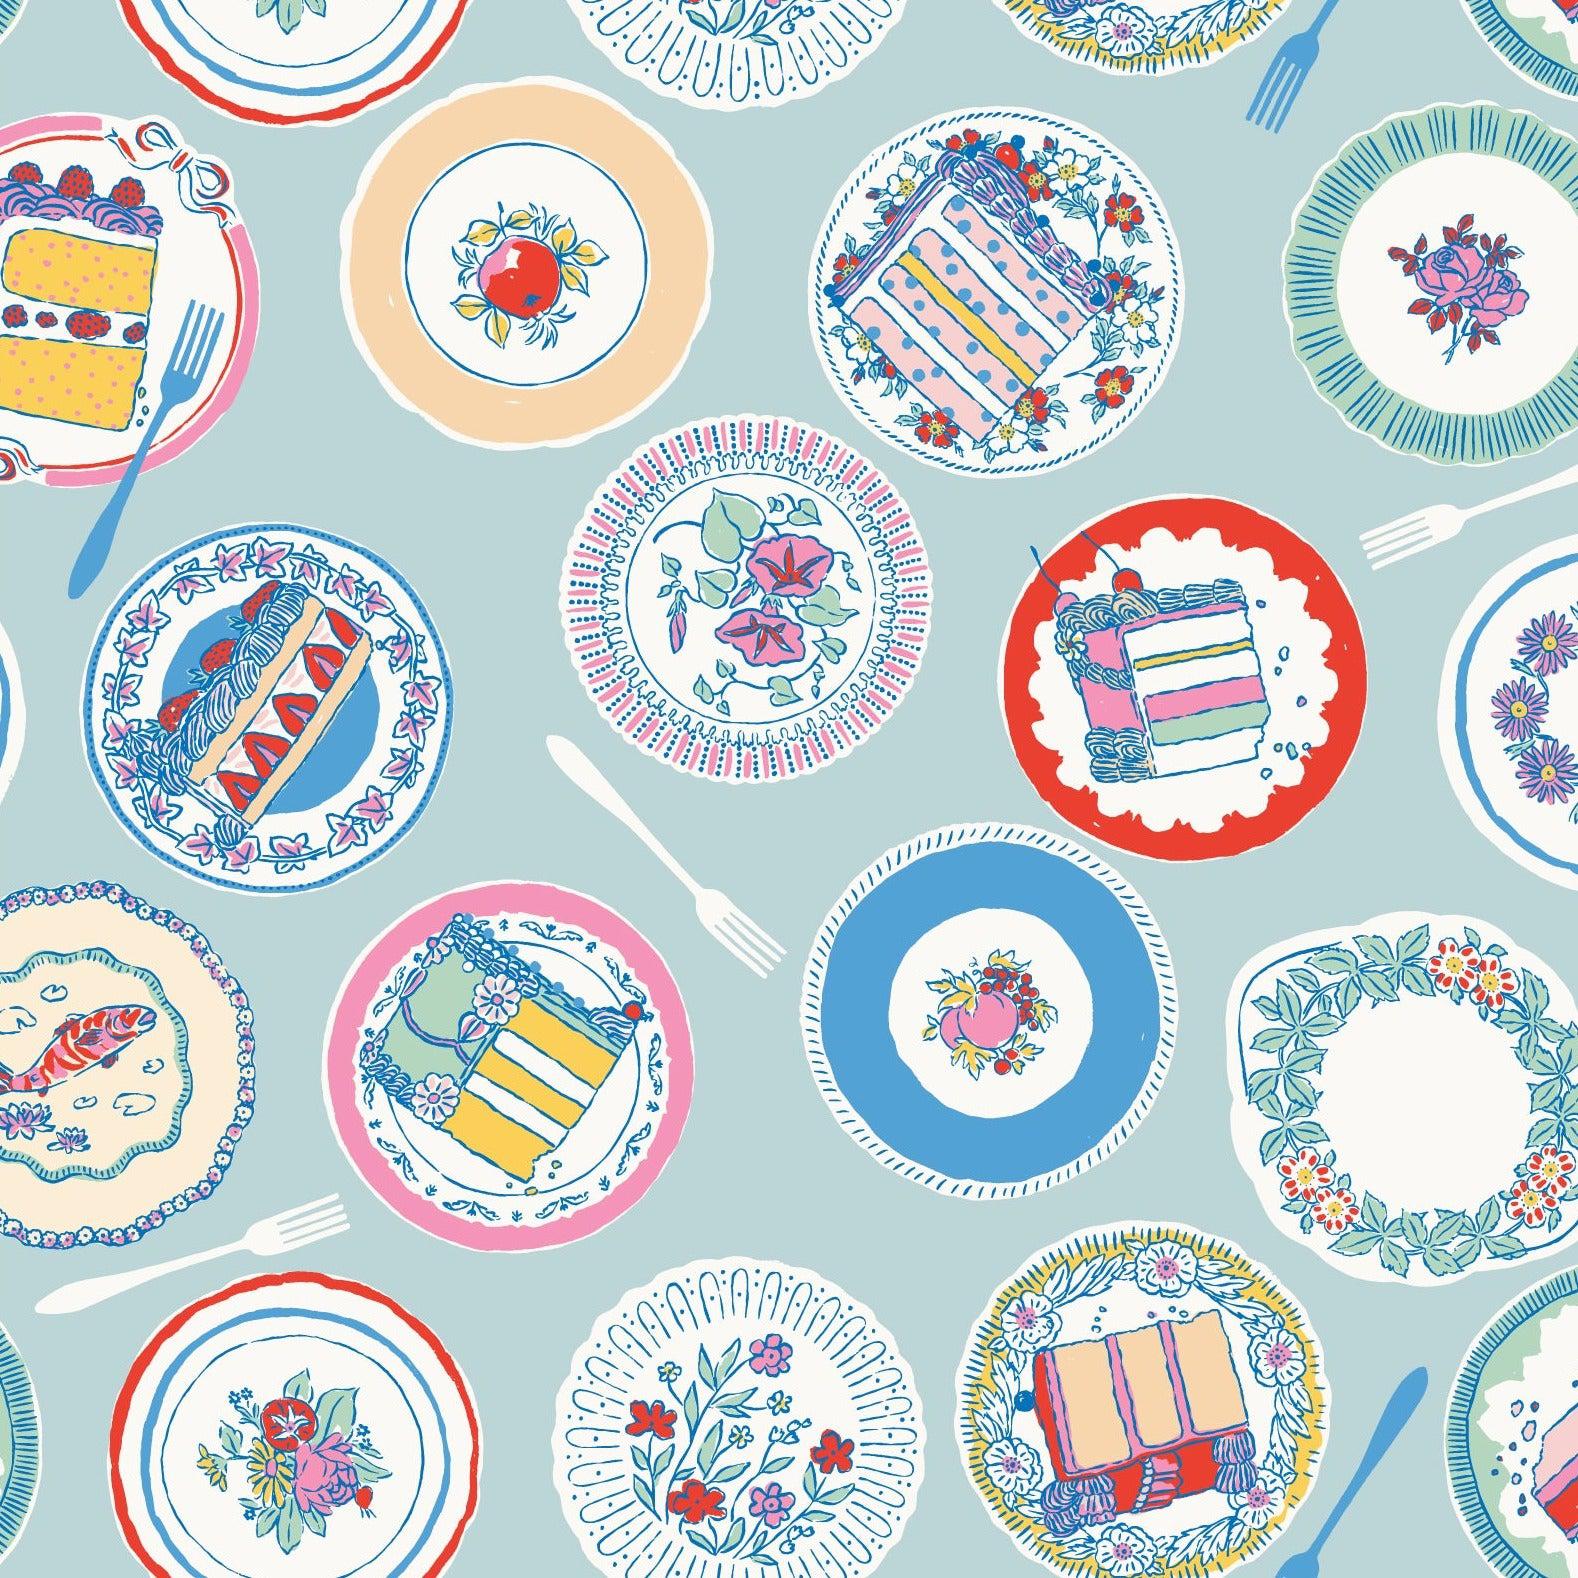 Cloud9-Piece Of Cake!-fabric-gather here online